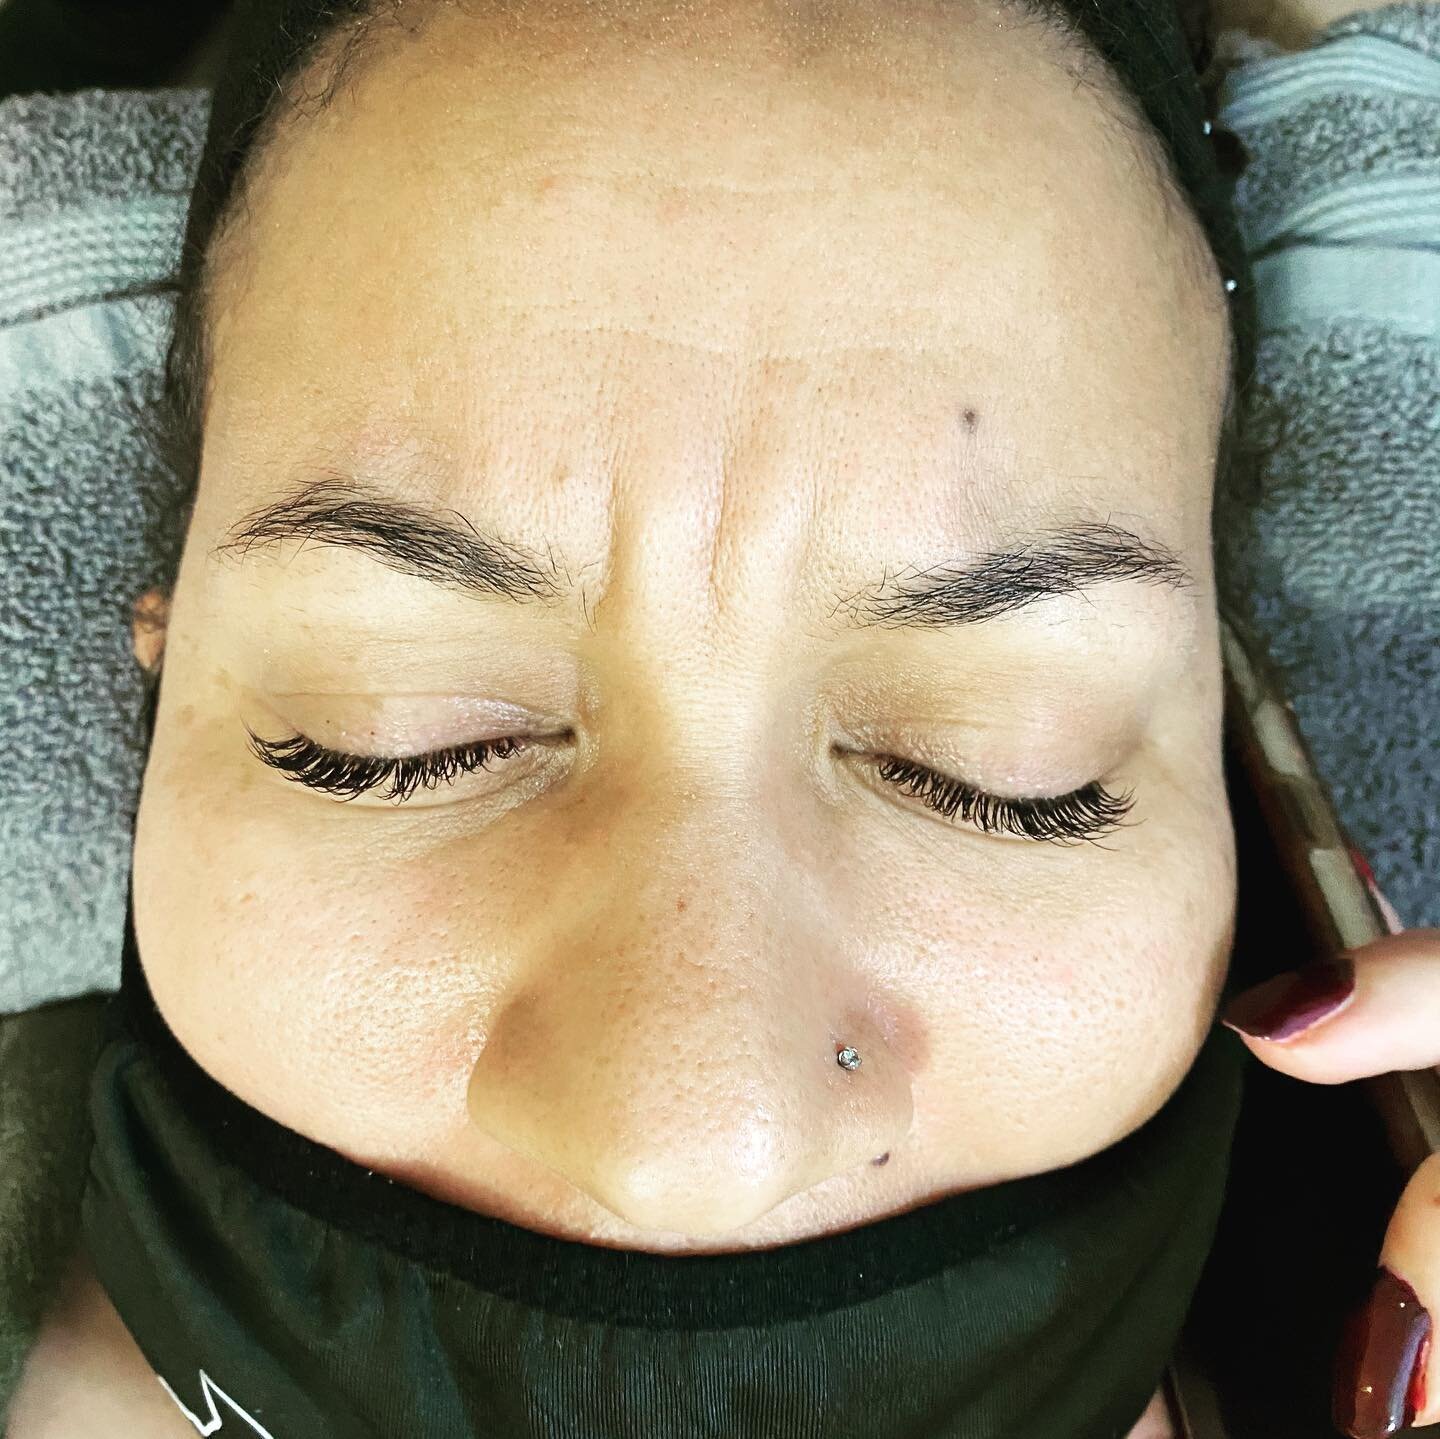 Do you want fuller looking brows that last longer than a day? Try Brow Lamination. I now offer this as well as lash lifts! Book online now at salonblvd.com or DM me too